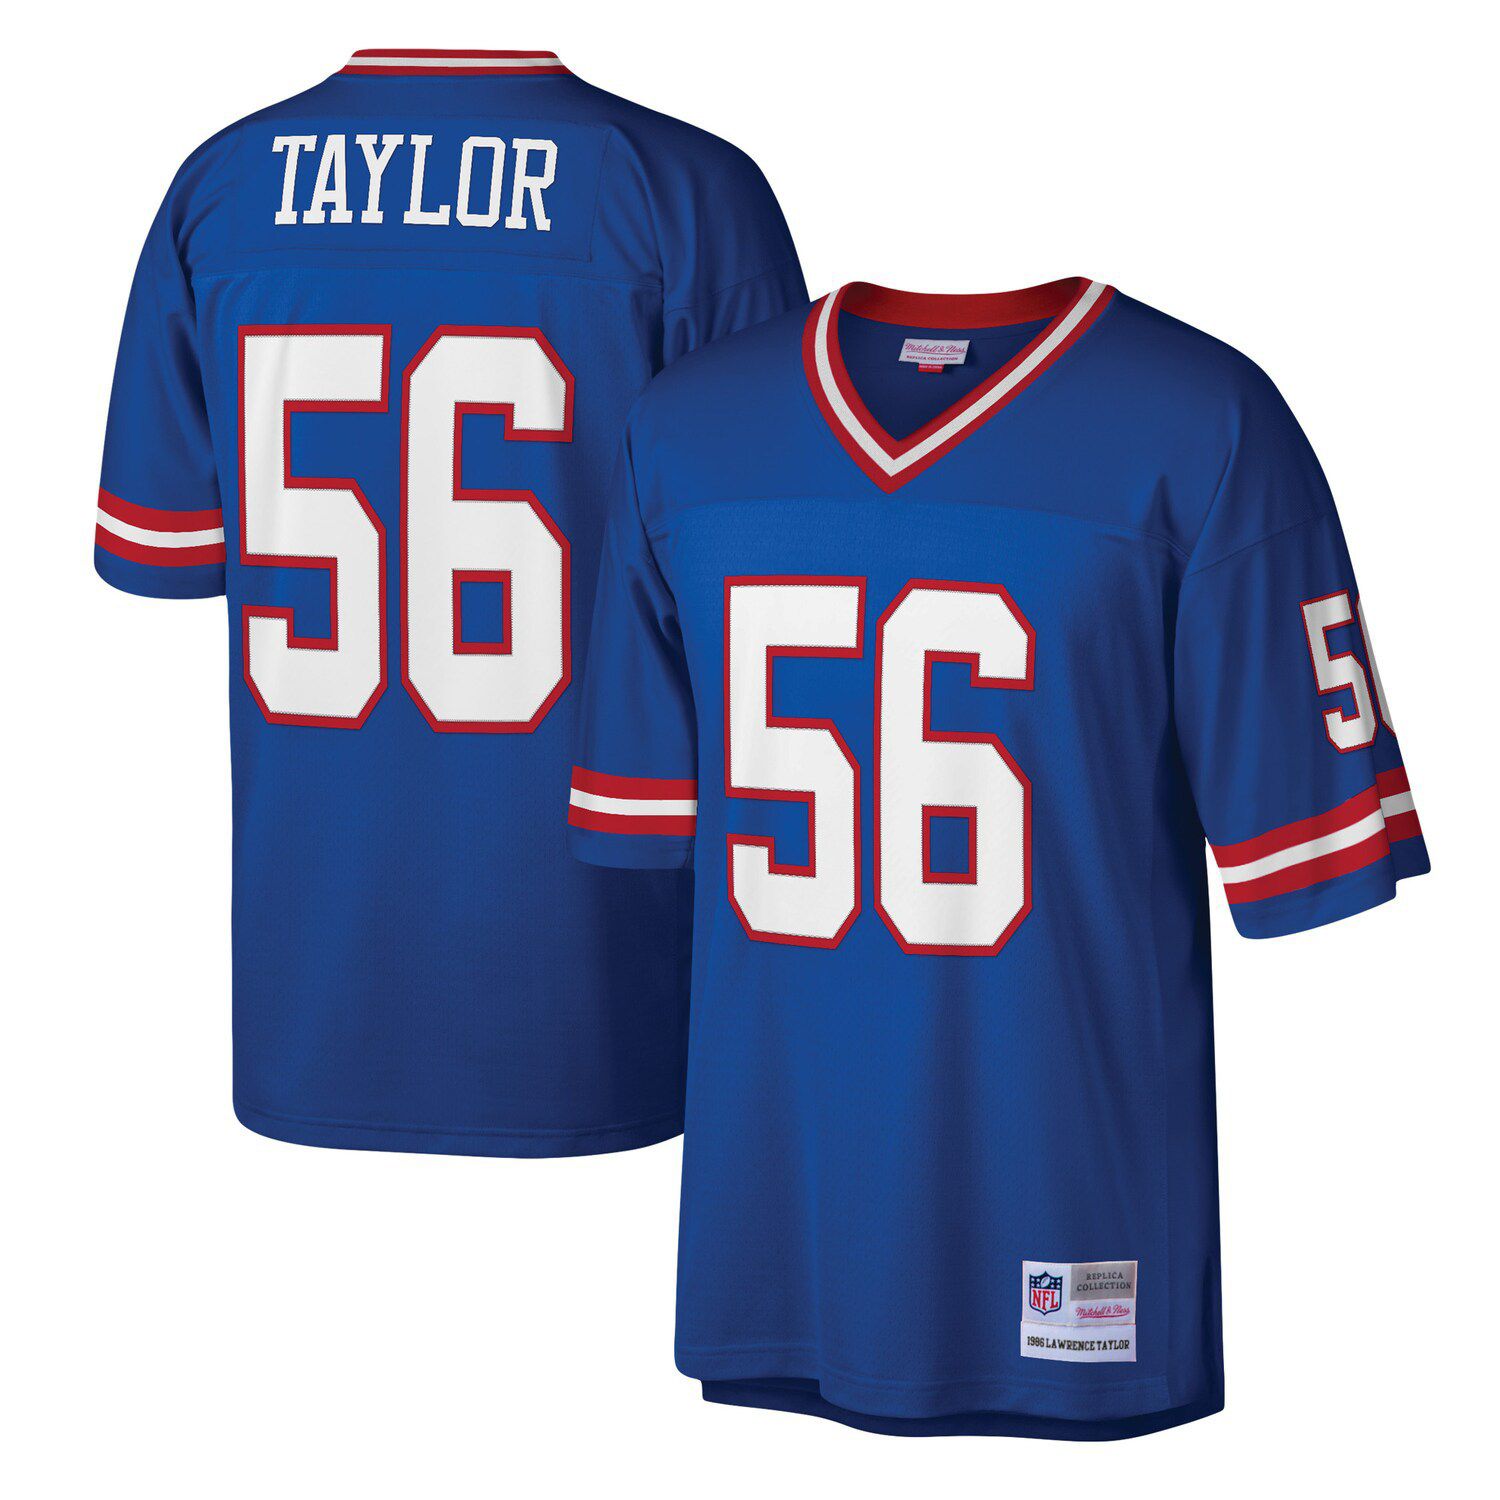 New York Giants game jersey